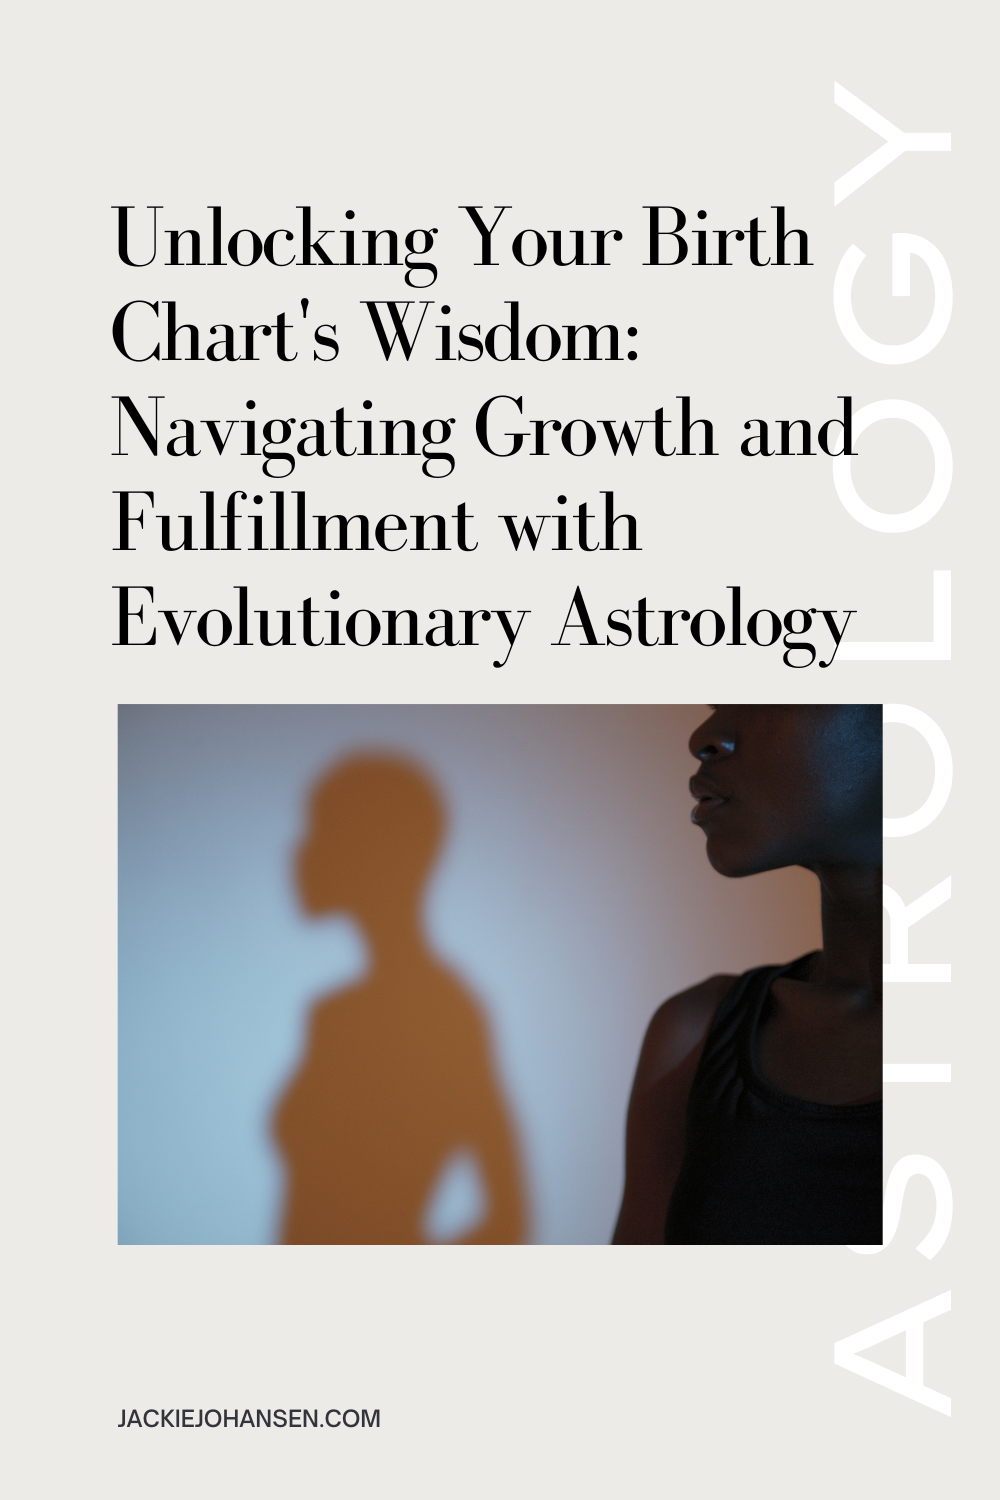 Unlock the wisdom of your birth chart by exploring evolutionary astrology and Jung's concept of Self